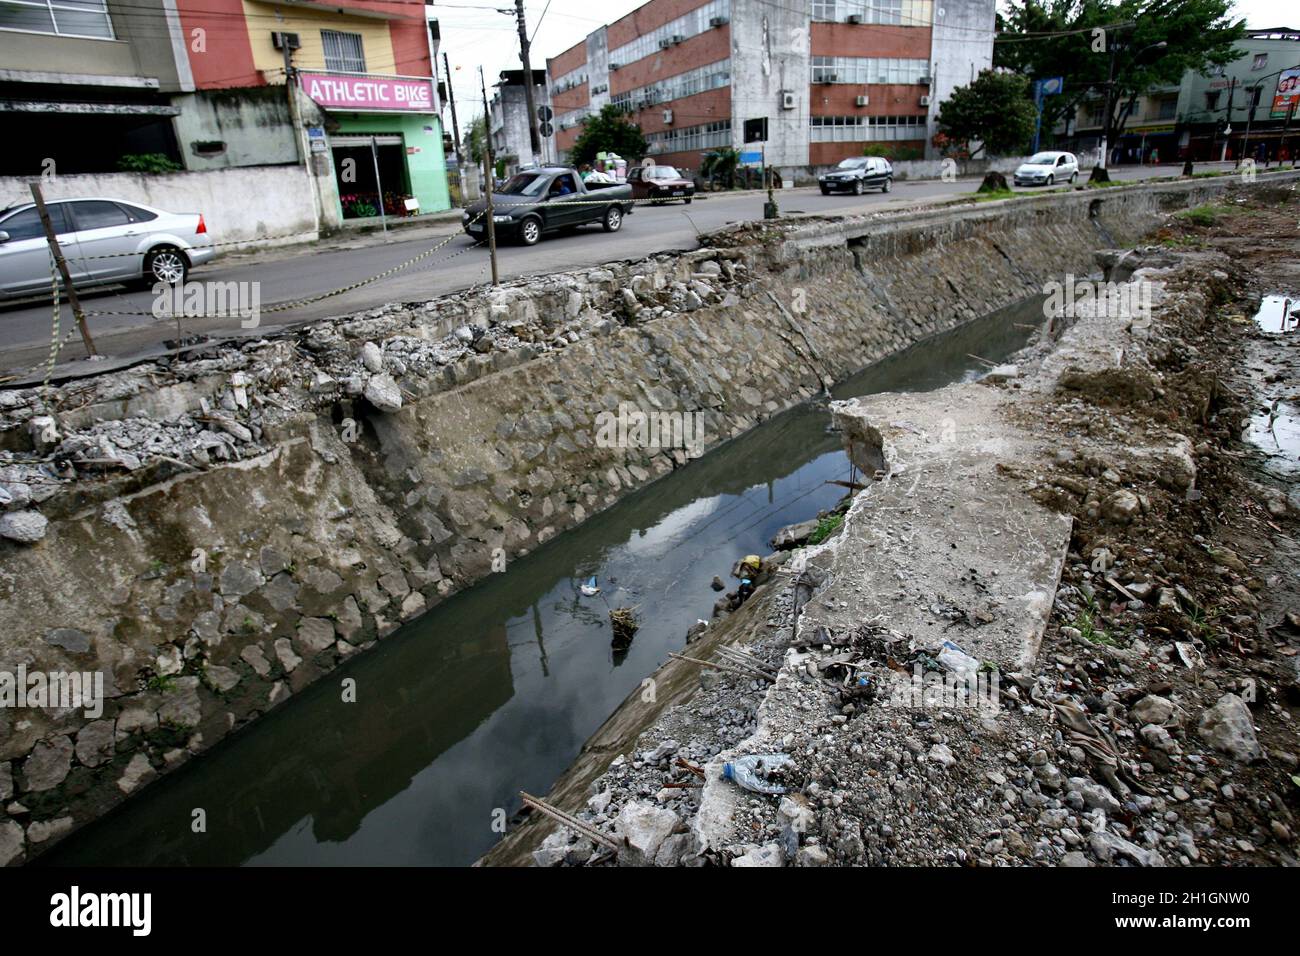 itabuna, bahia / brazil - december 7, 2011: sewage channel is seen in the city of Itabuna, in the south of Bahia. *** Local Caption *** Stock Photo